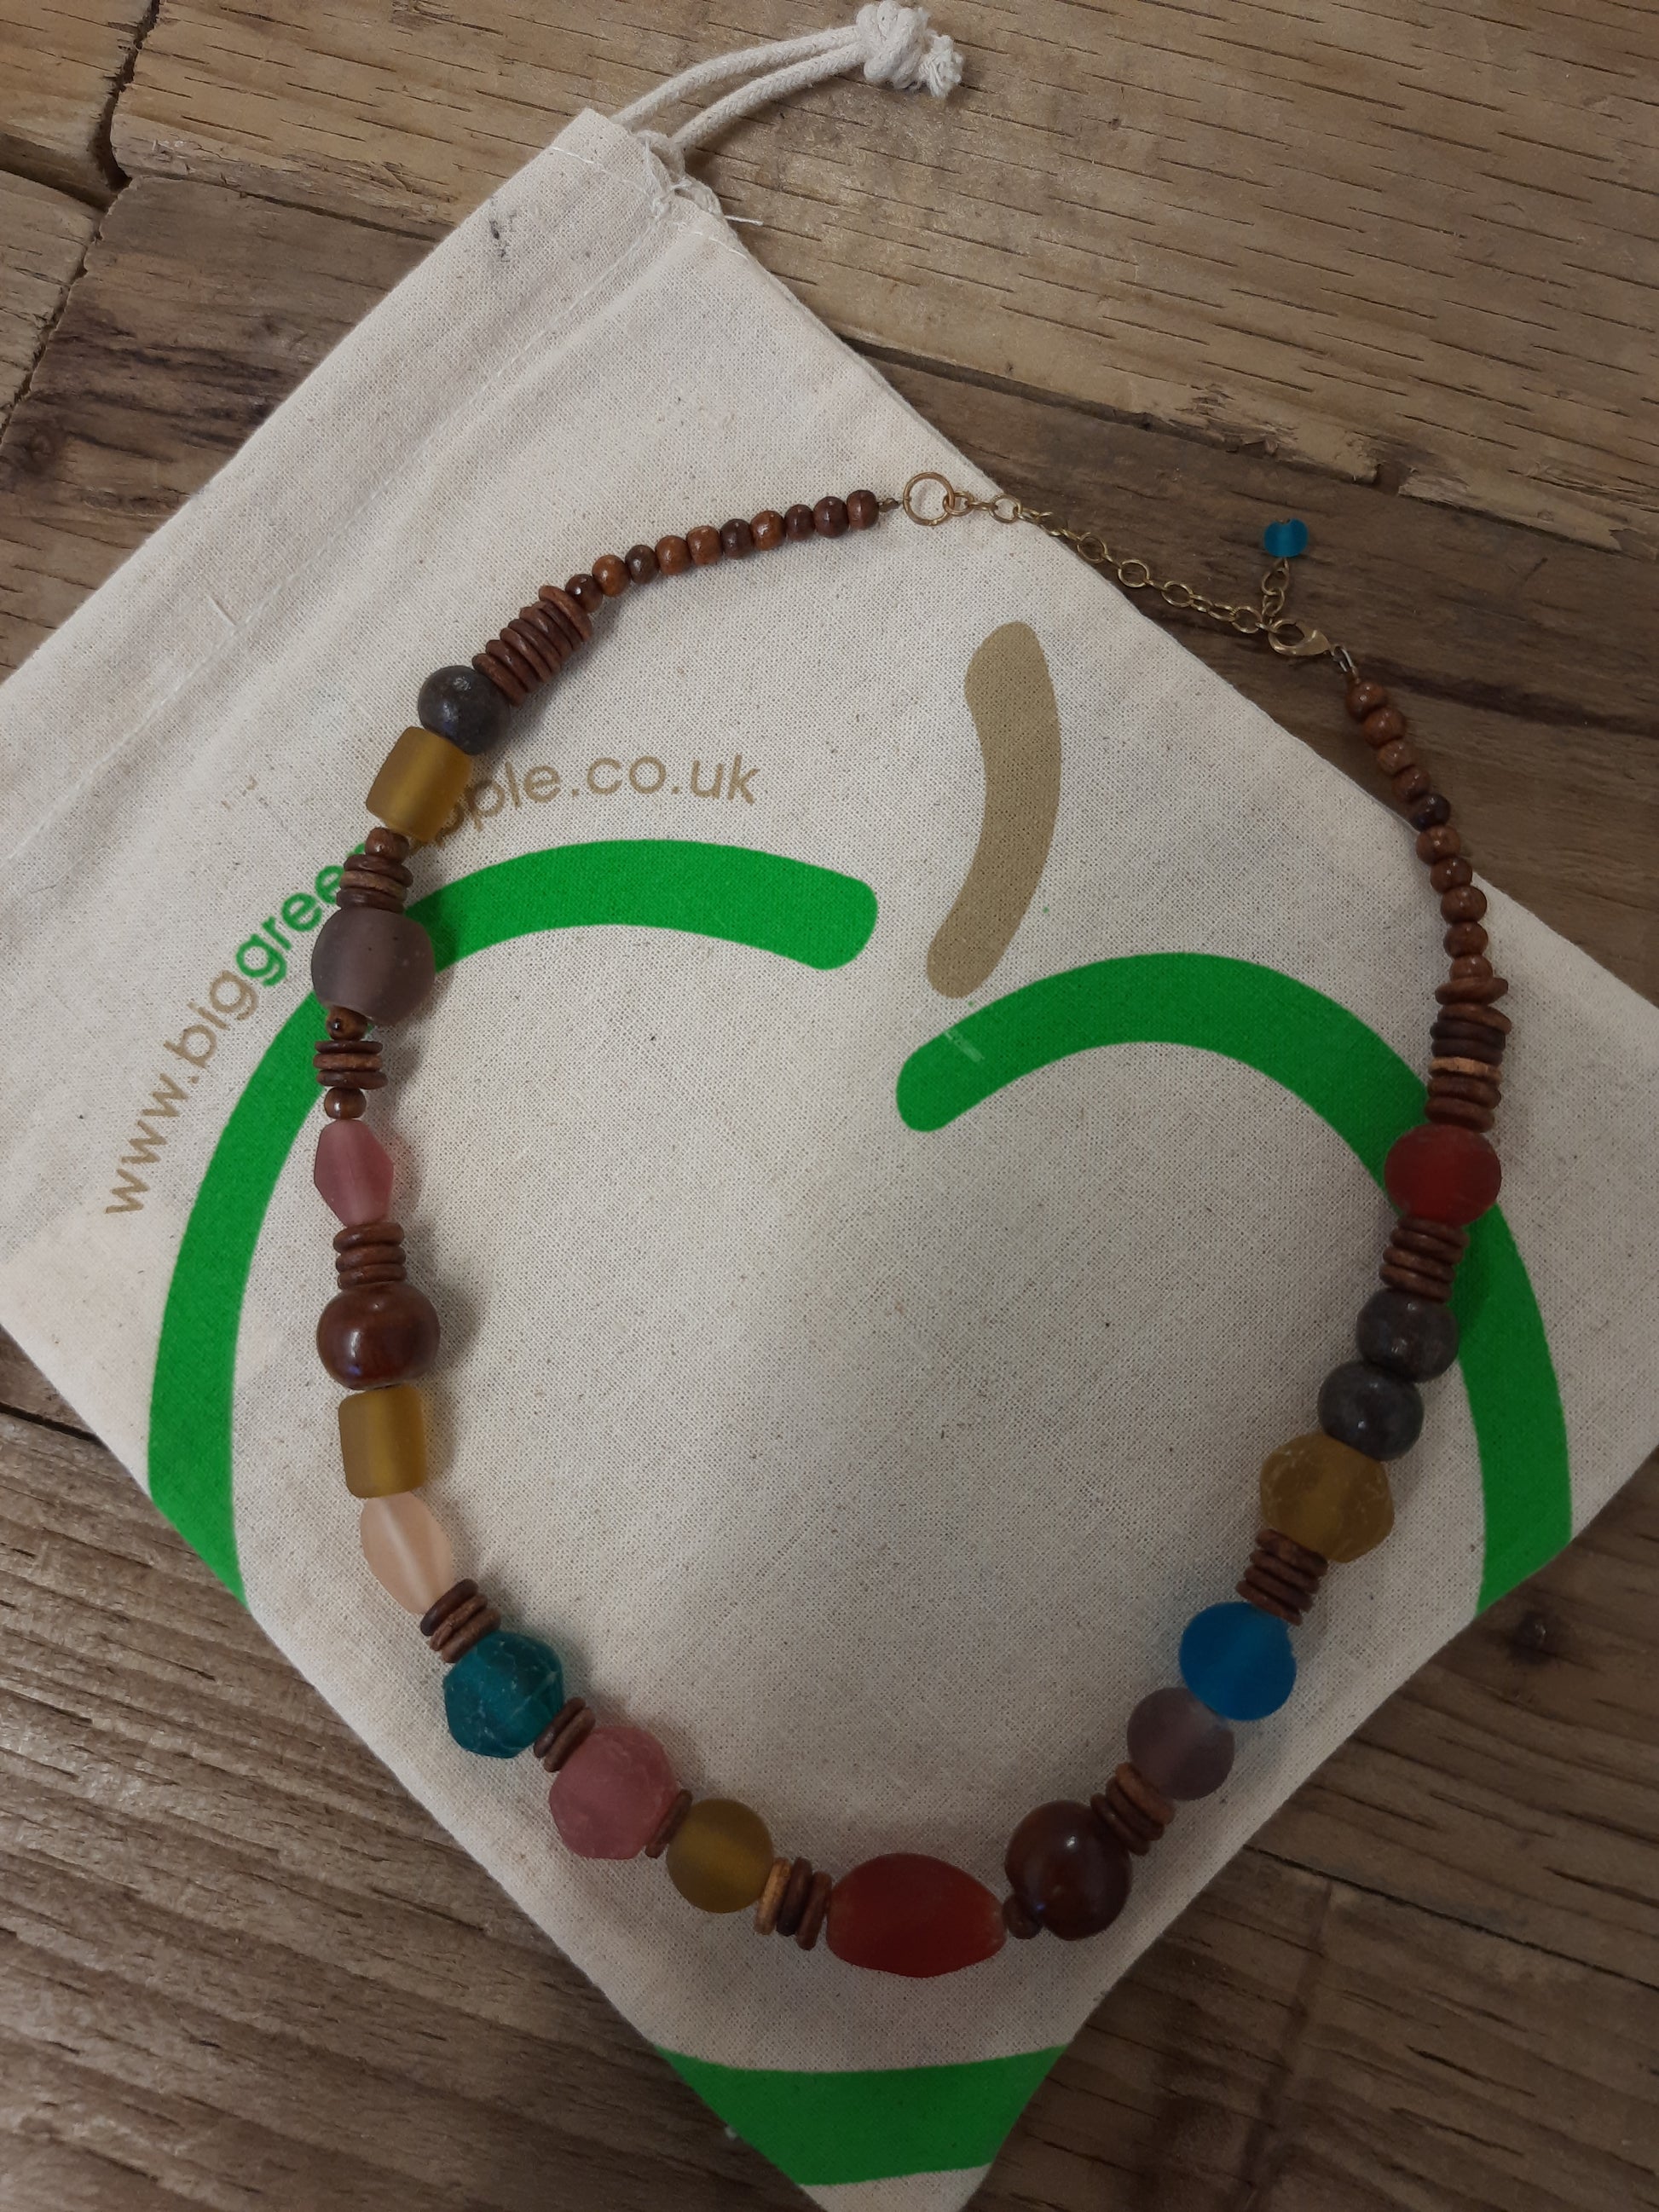 Necklaces, Fair Trade Jewellery, Necklaces, Ethical Presents, Sustainable Gift, Christmas Gift, BIG GREEN APPLE